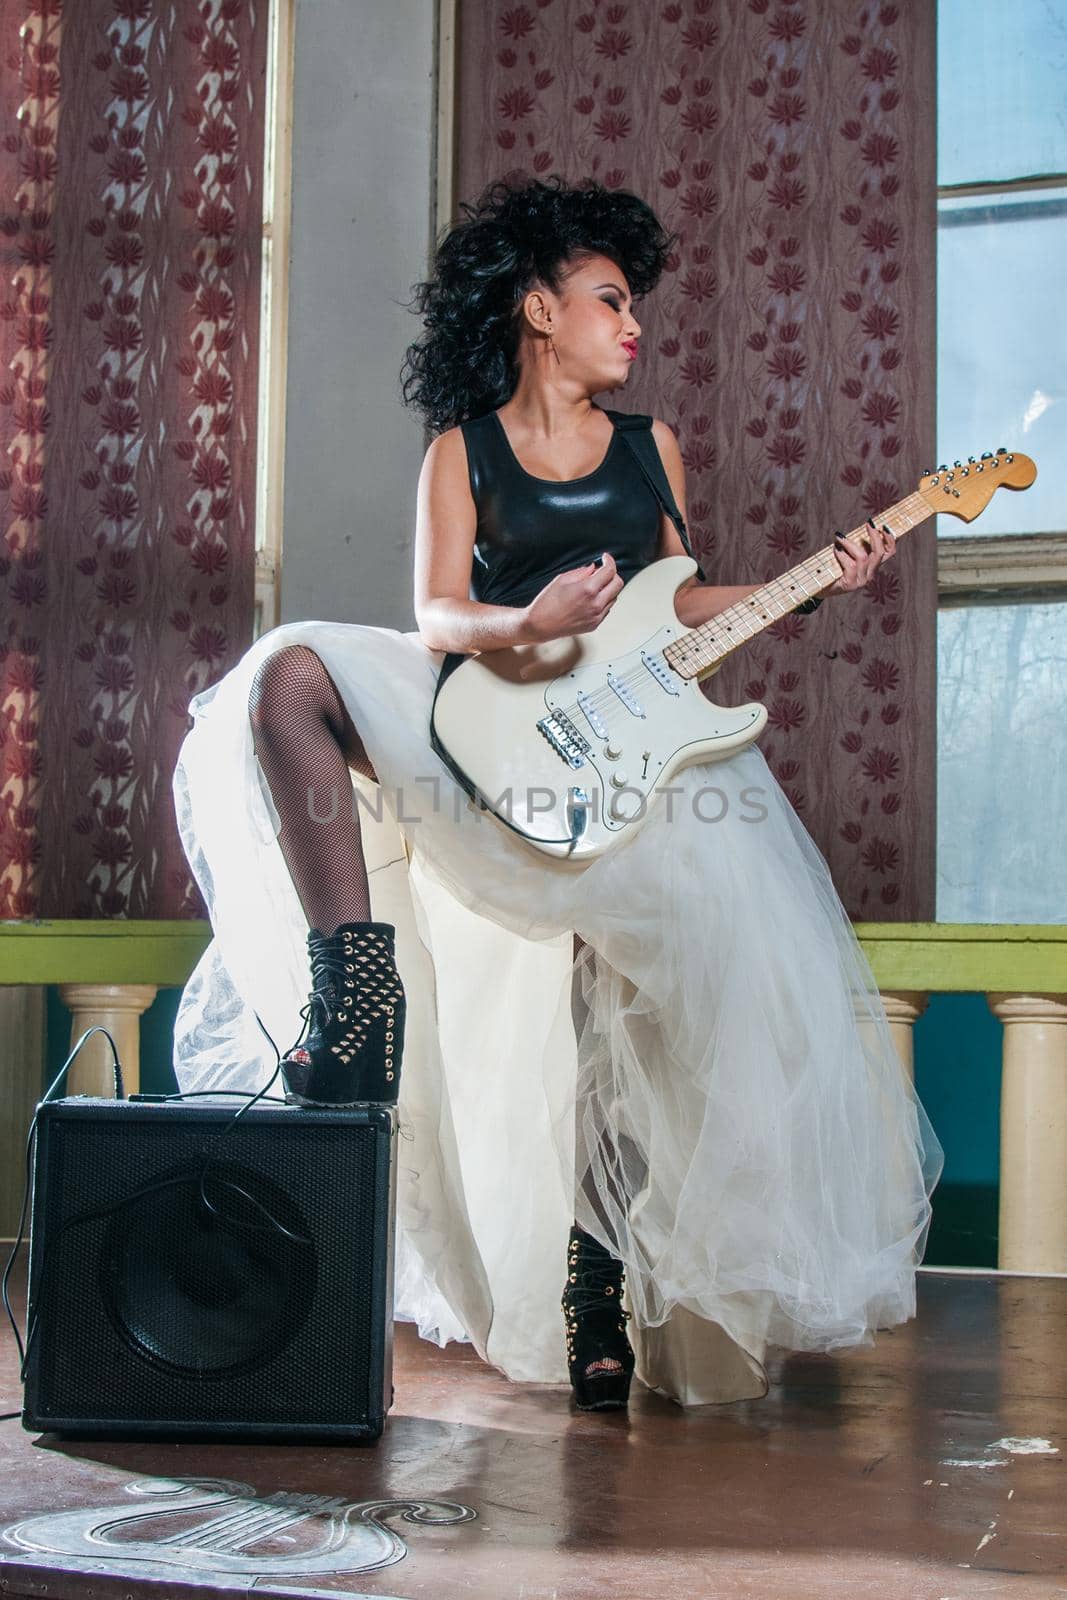 Photo of a female guitarist playing an electric guitar.